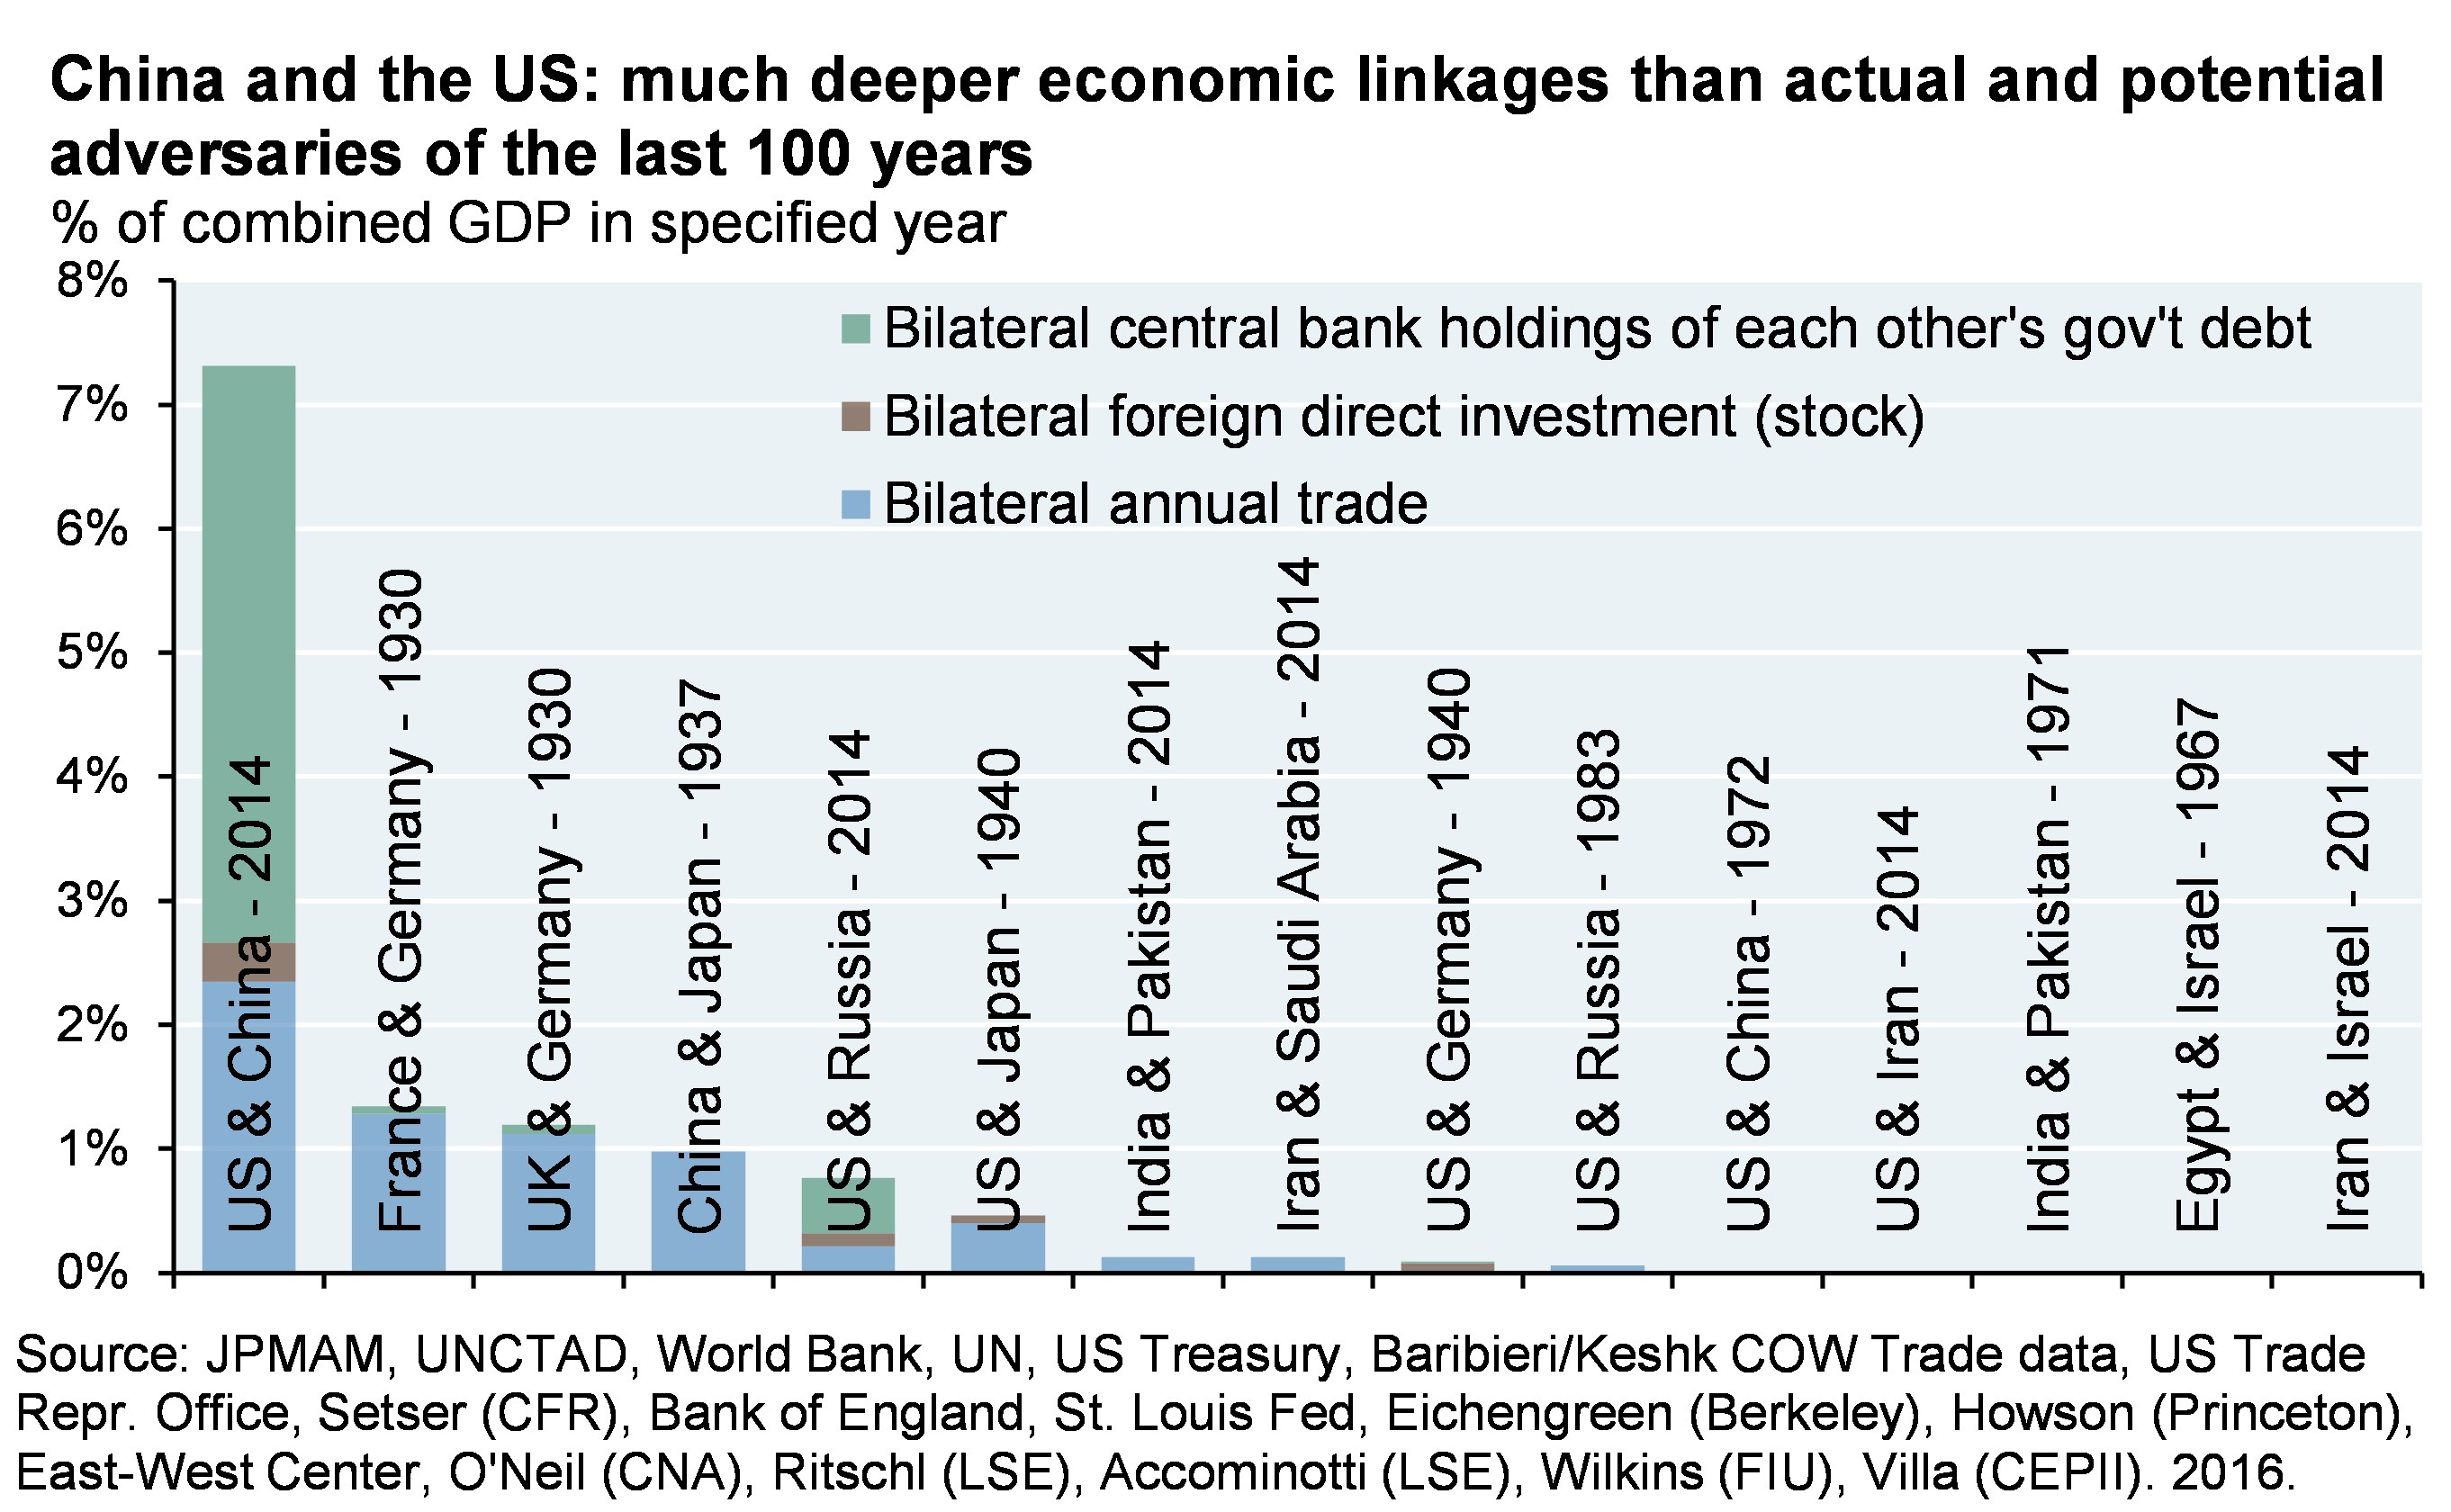 Chart shows economic linkages between actual and potential adversaries of the last 100 years by plotting each pairing’s combined GDP in a specified year (as estimated by the sum of their bilateral central bank holdings, bilateral foreign direct investment, and bilateral annual trade). US-China economic linkages far surpass any other pairings, exhibiting a combined GDP of over 7% in 2014. The next runner-ups, France-Germany, exhibit a combined GDP of just over 1% in 1930.